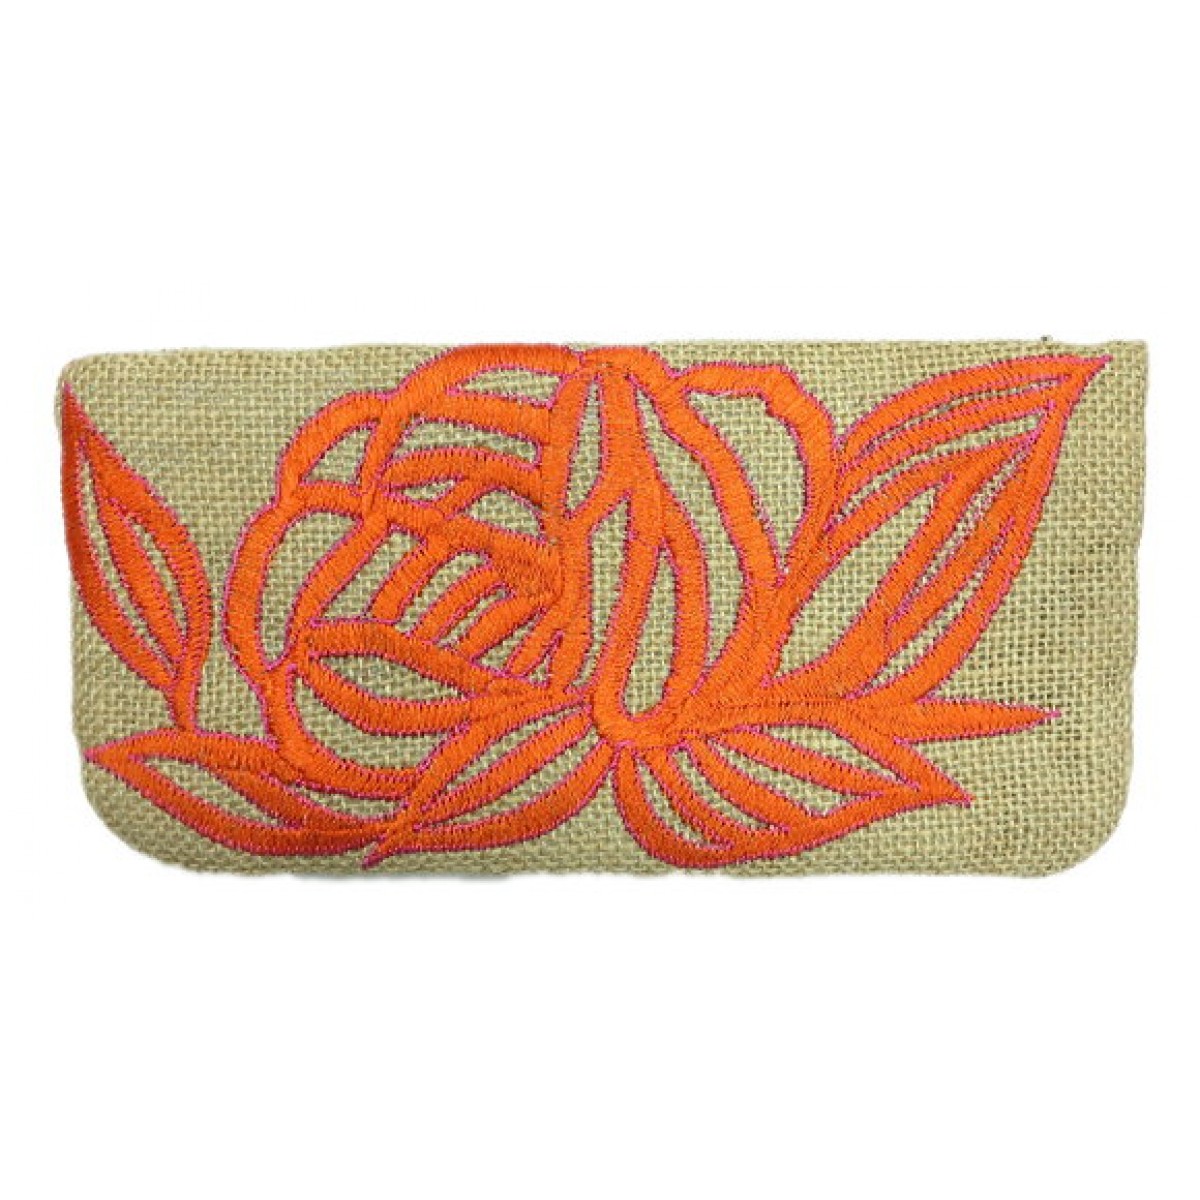 Floral Embroidered Purse